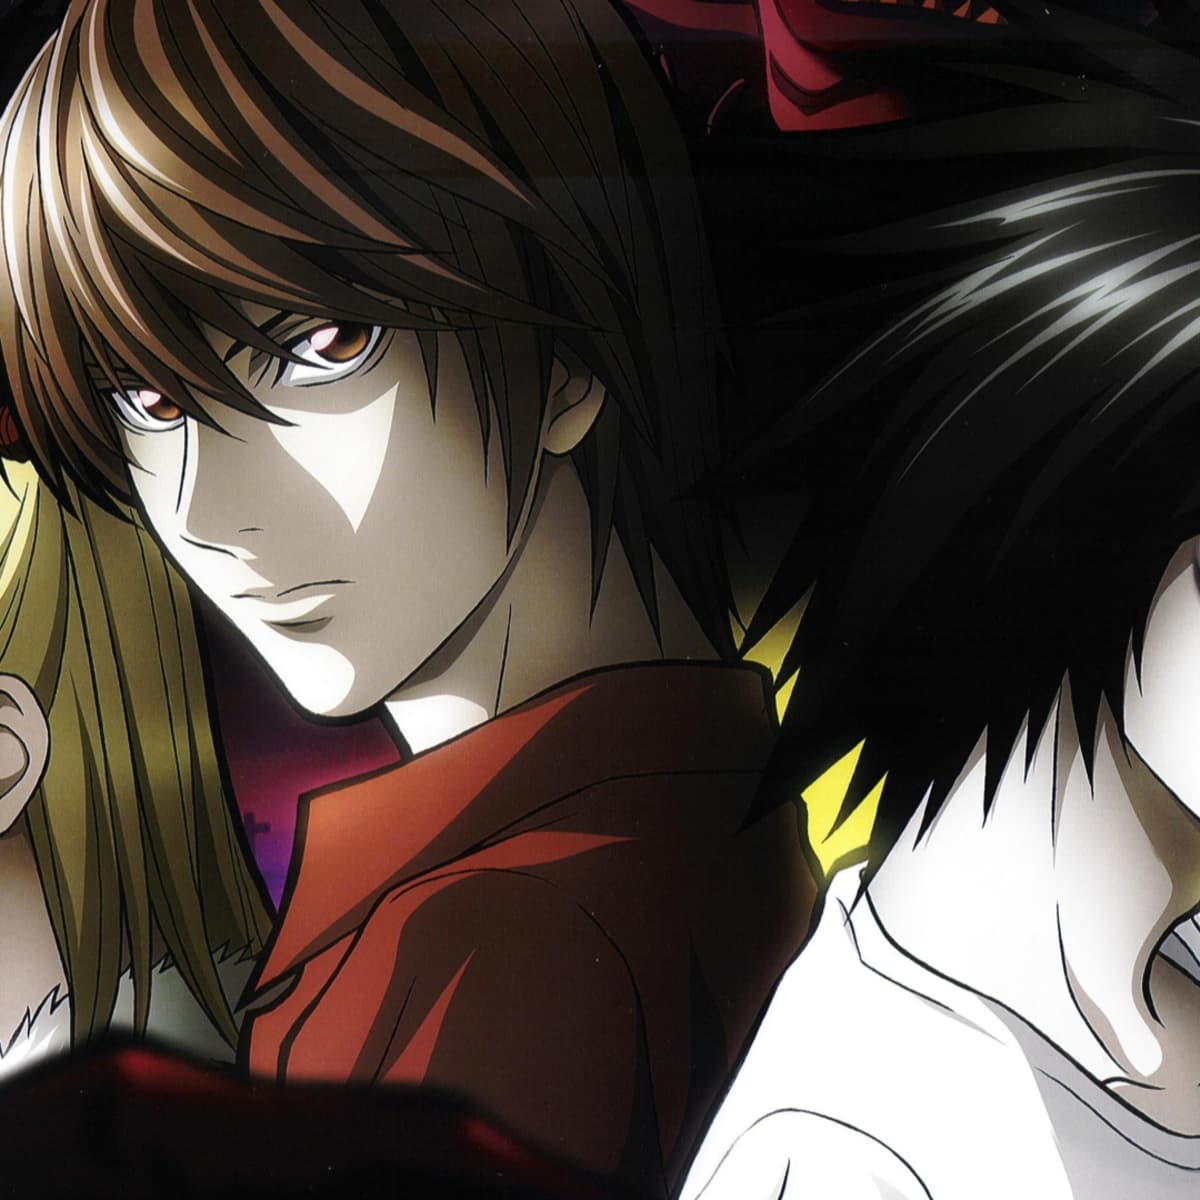 Death Note's